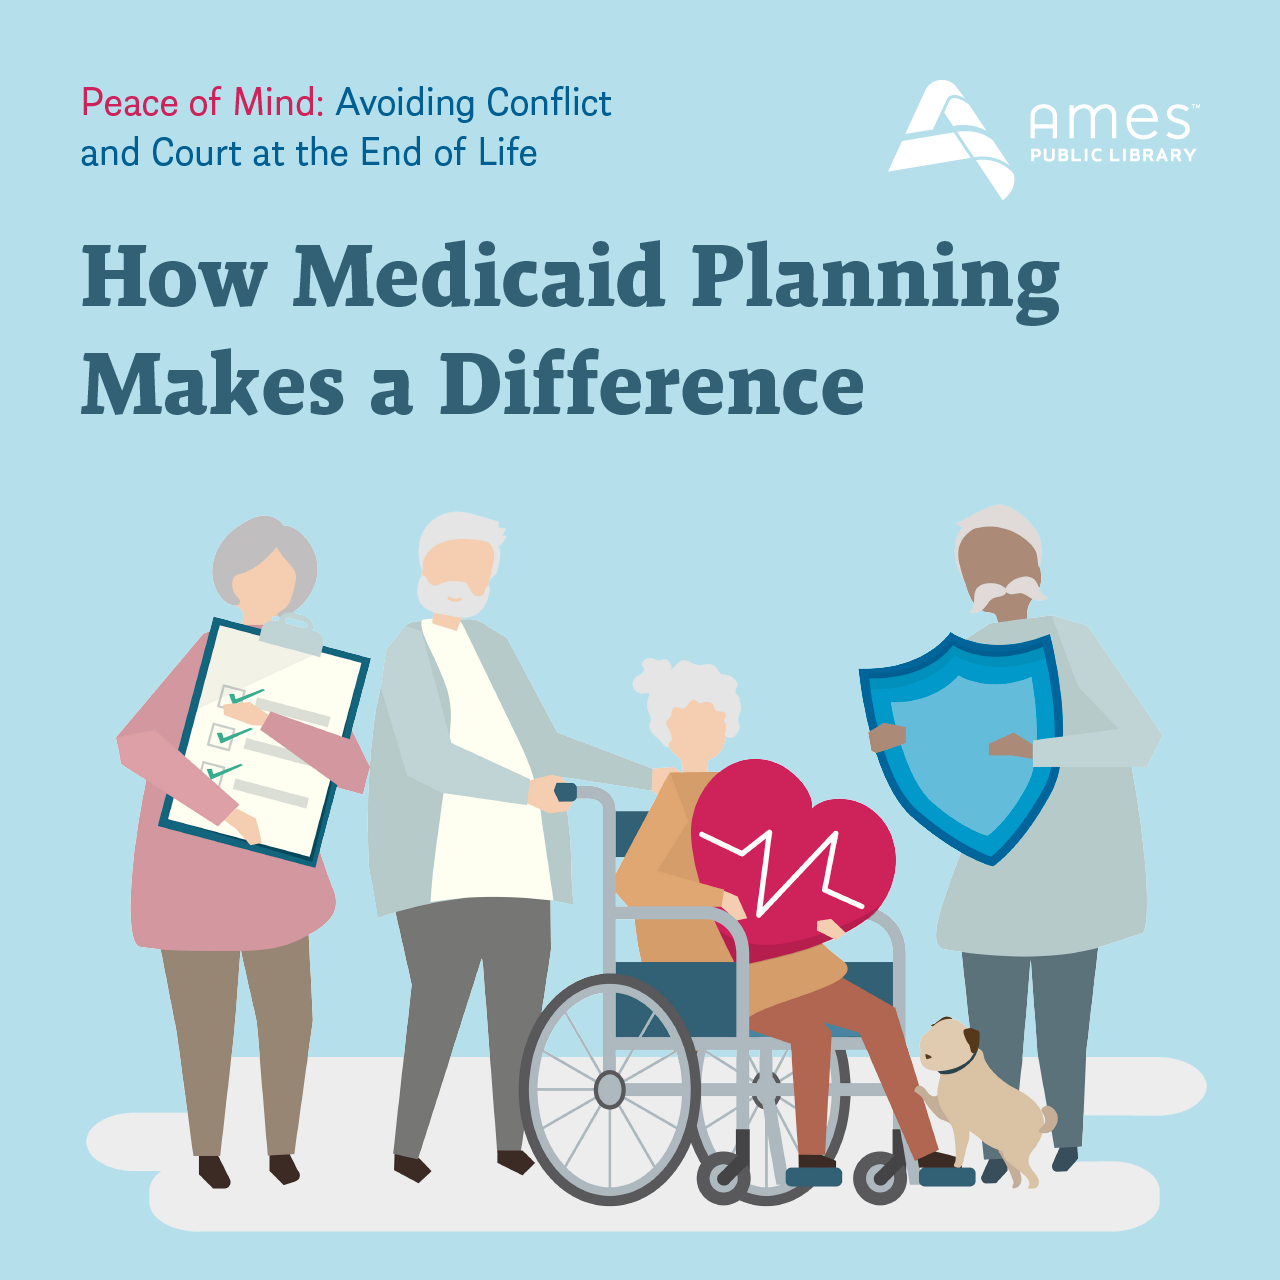 Peace of Mind: Avoiding Conflict & Court at the End of Life. How Medicaid Planning Makes a Difference